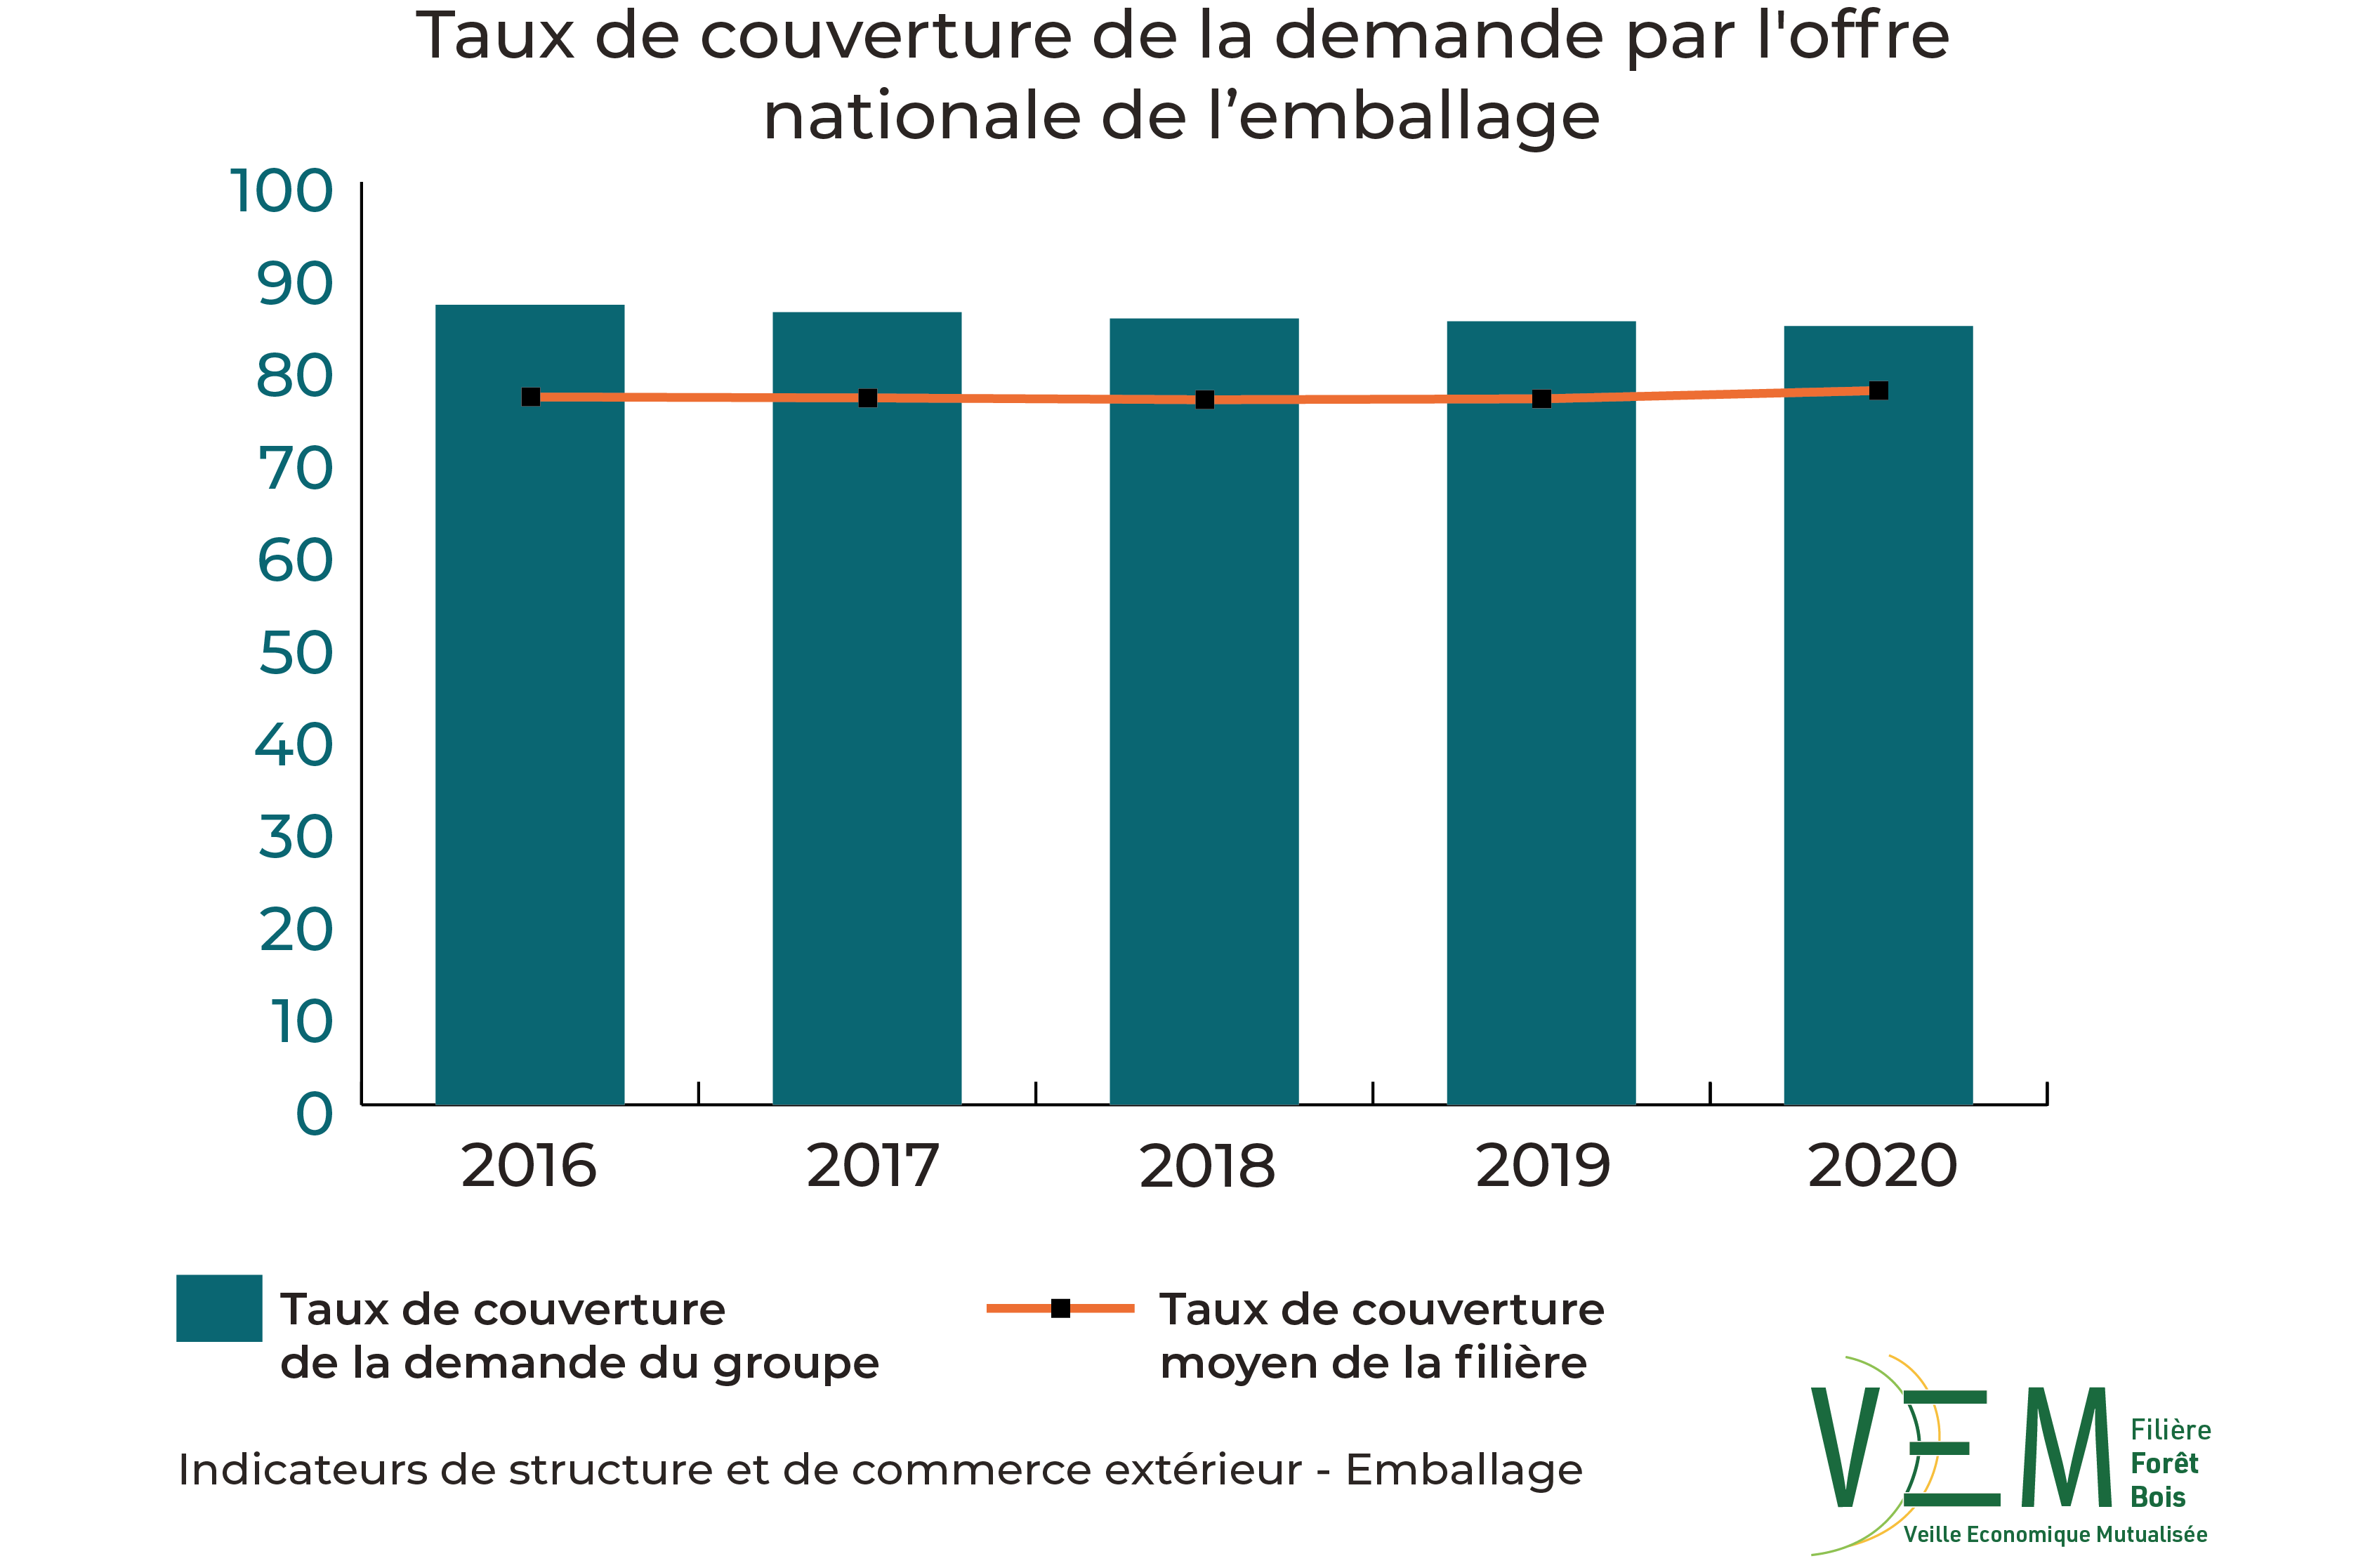 2022 ISCE TauxCouverture demande offre nationale Emballage